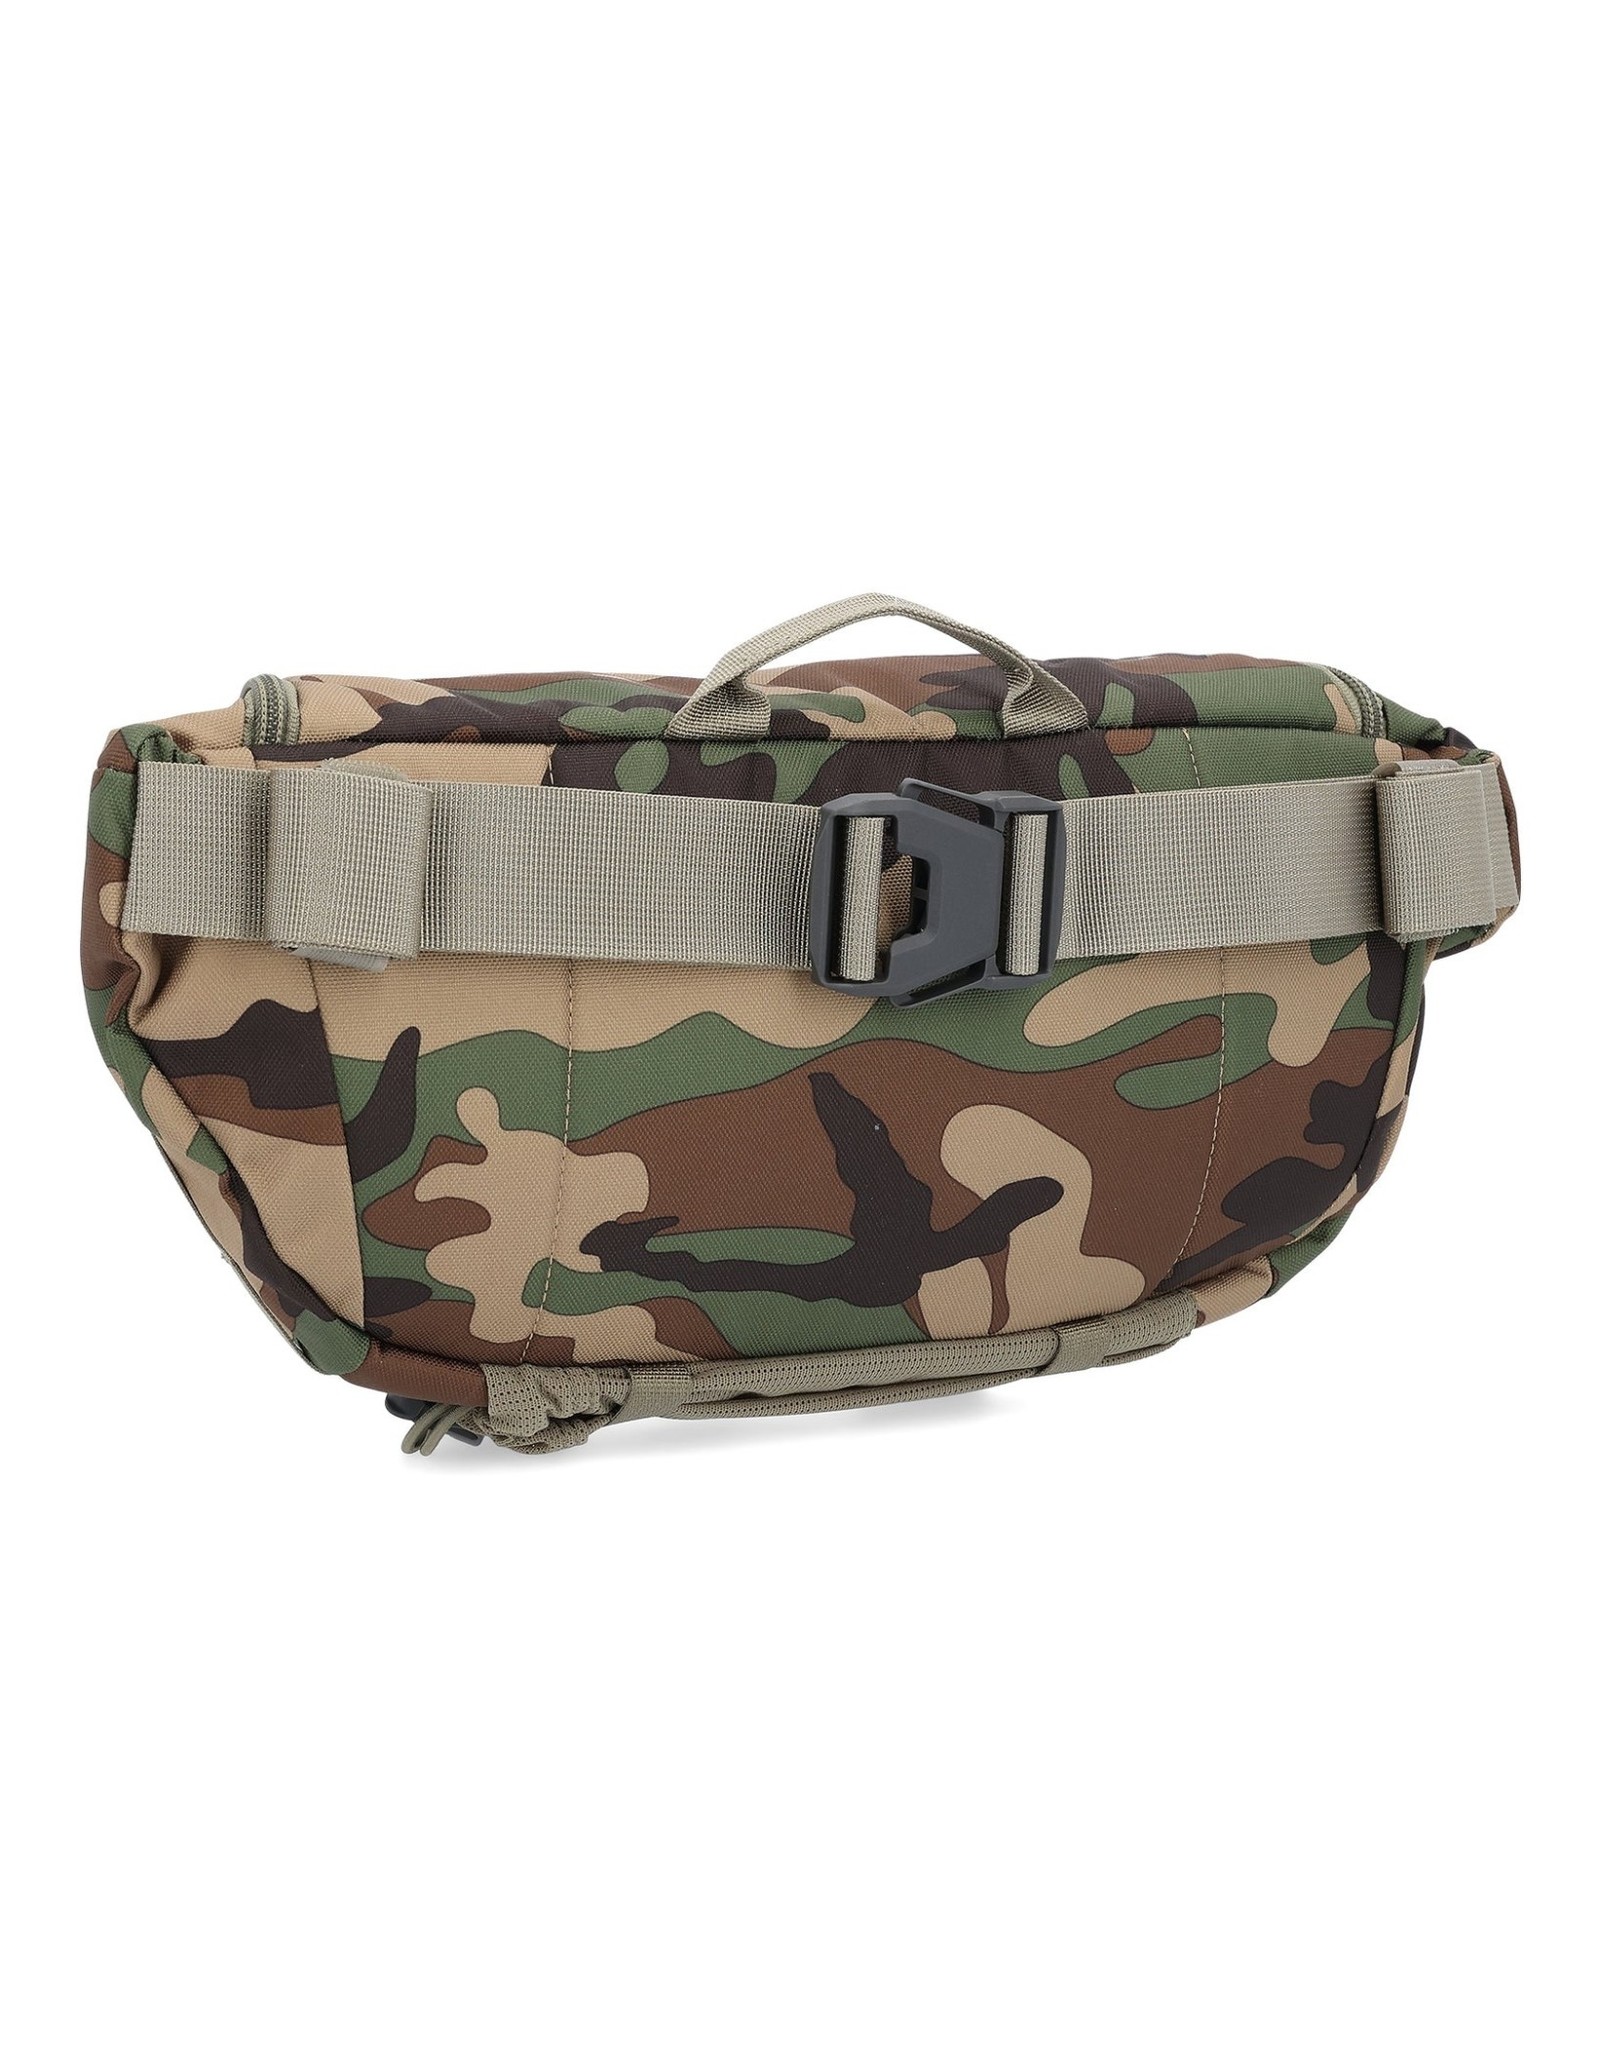 SIMMS Tributary Hip Pack (Woodland Camo) - Royal Gorge Anglers